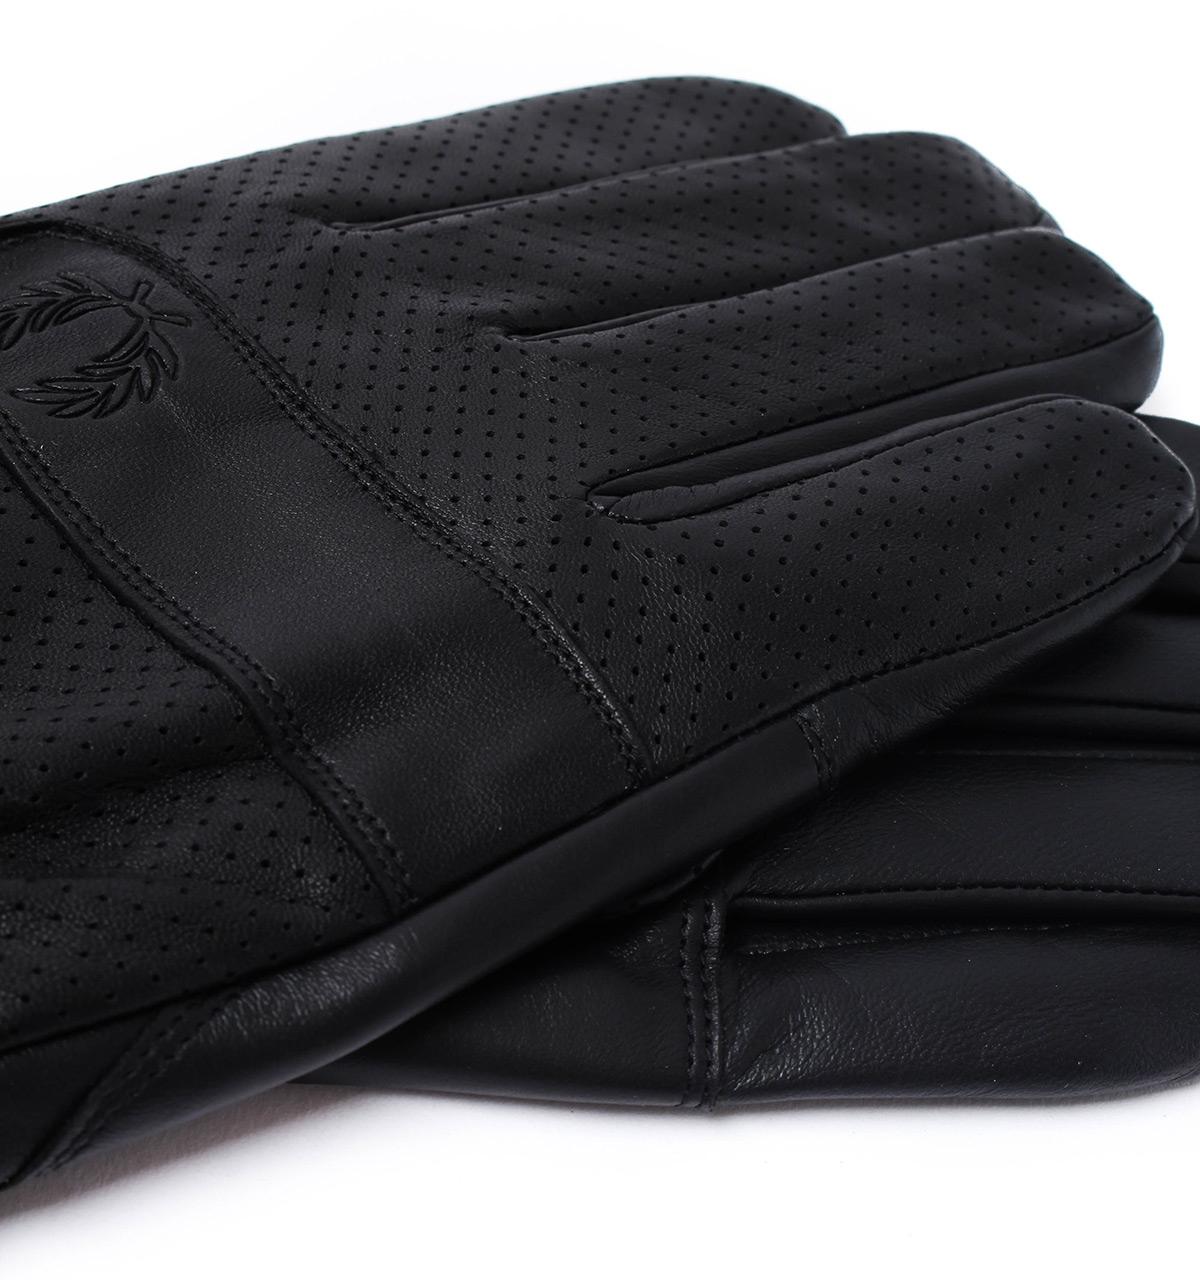 Fred Perry Perforated Black Leather Gloves for Men - Lyst